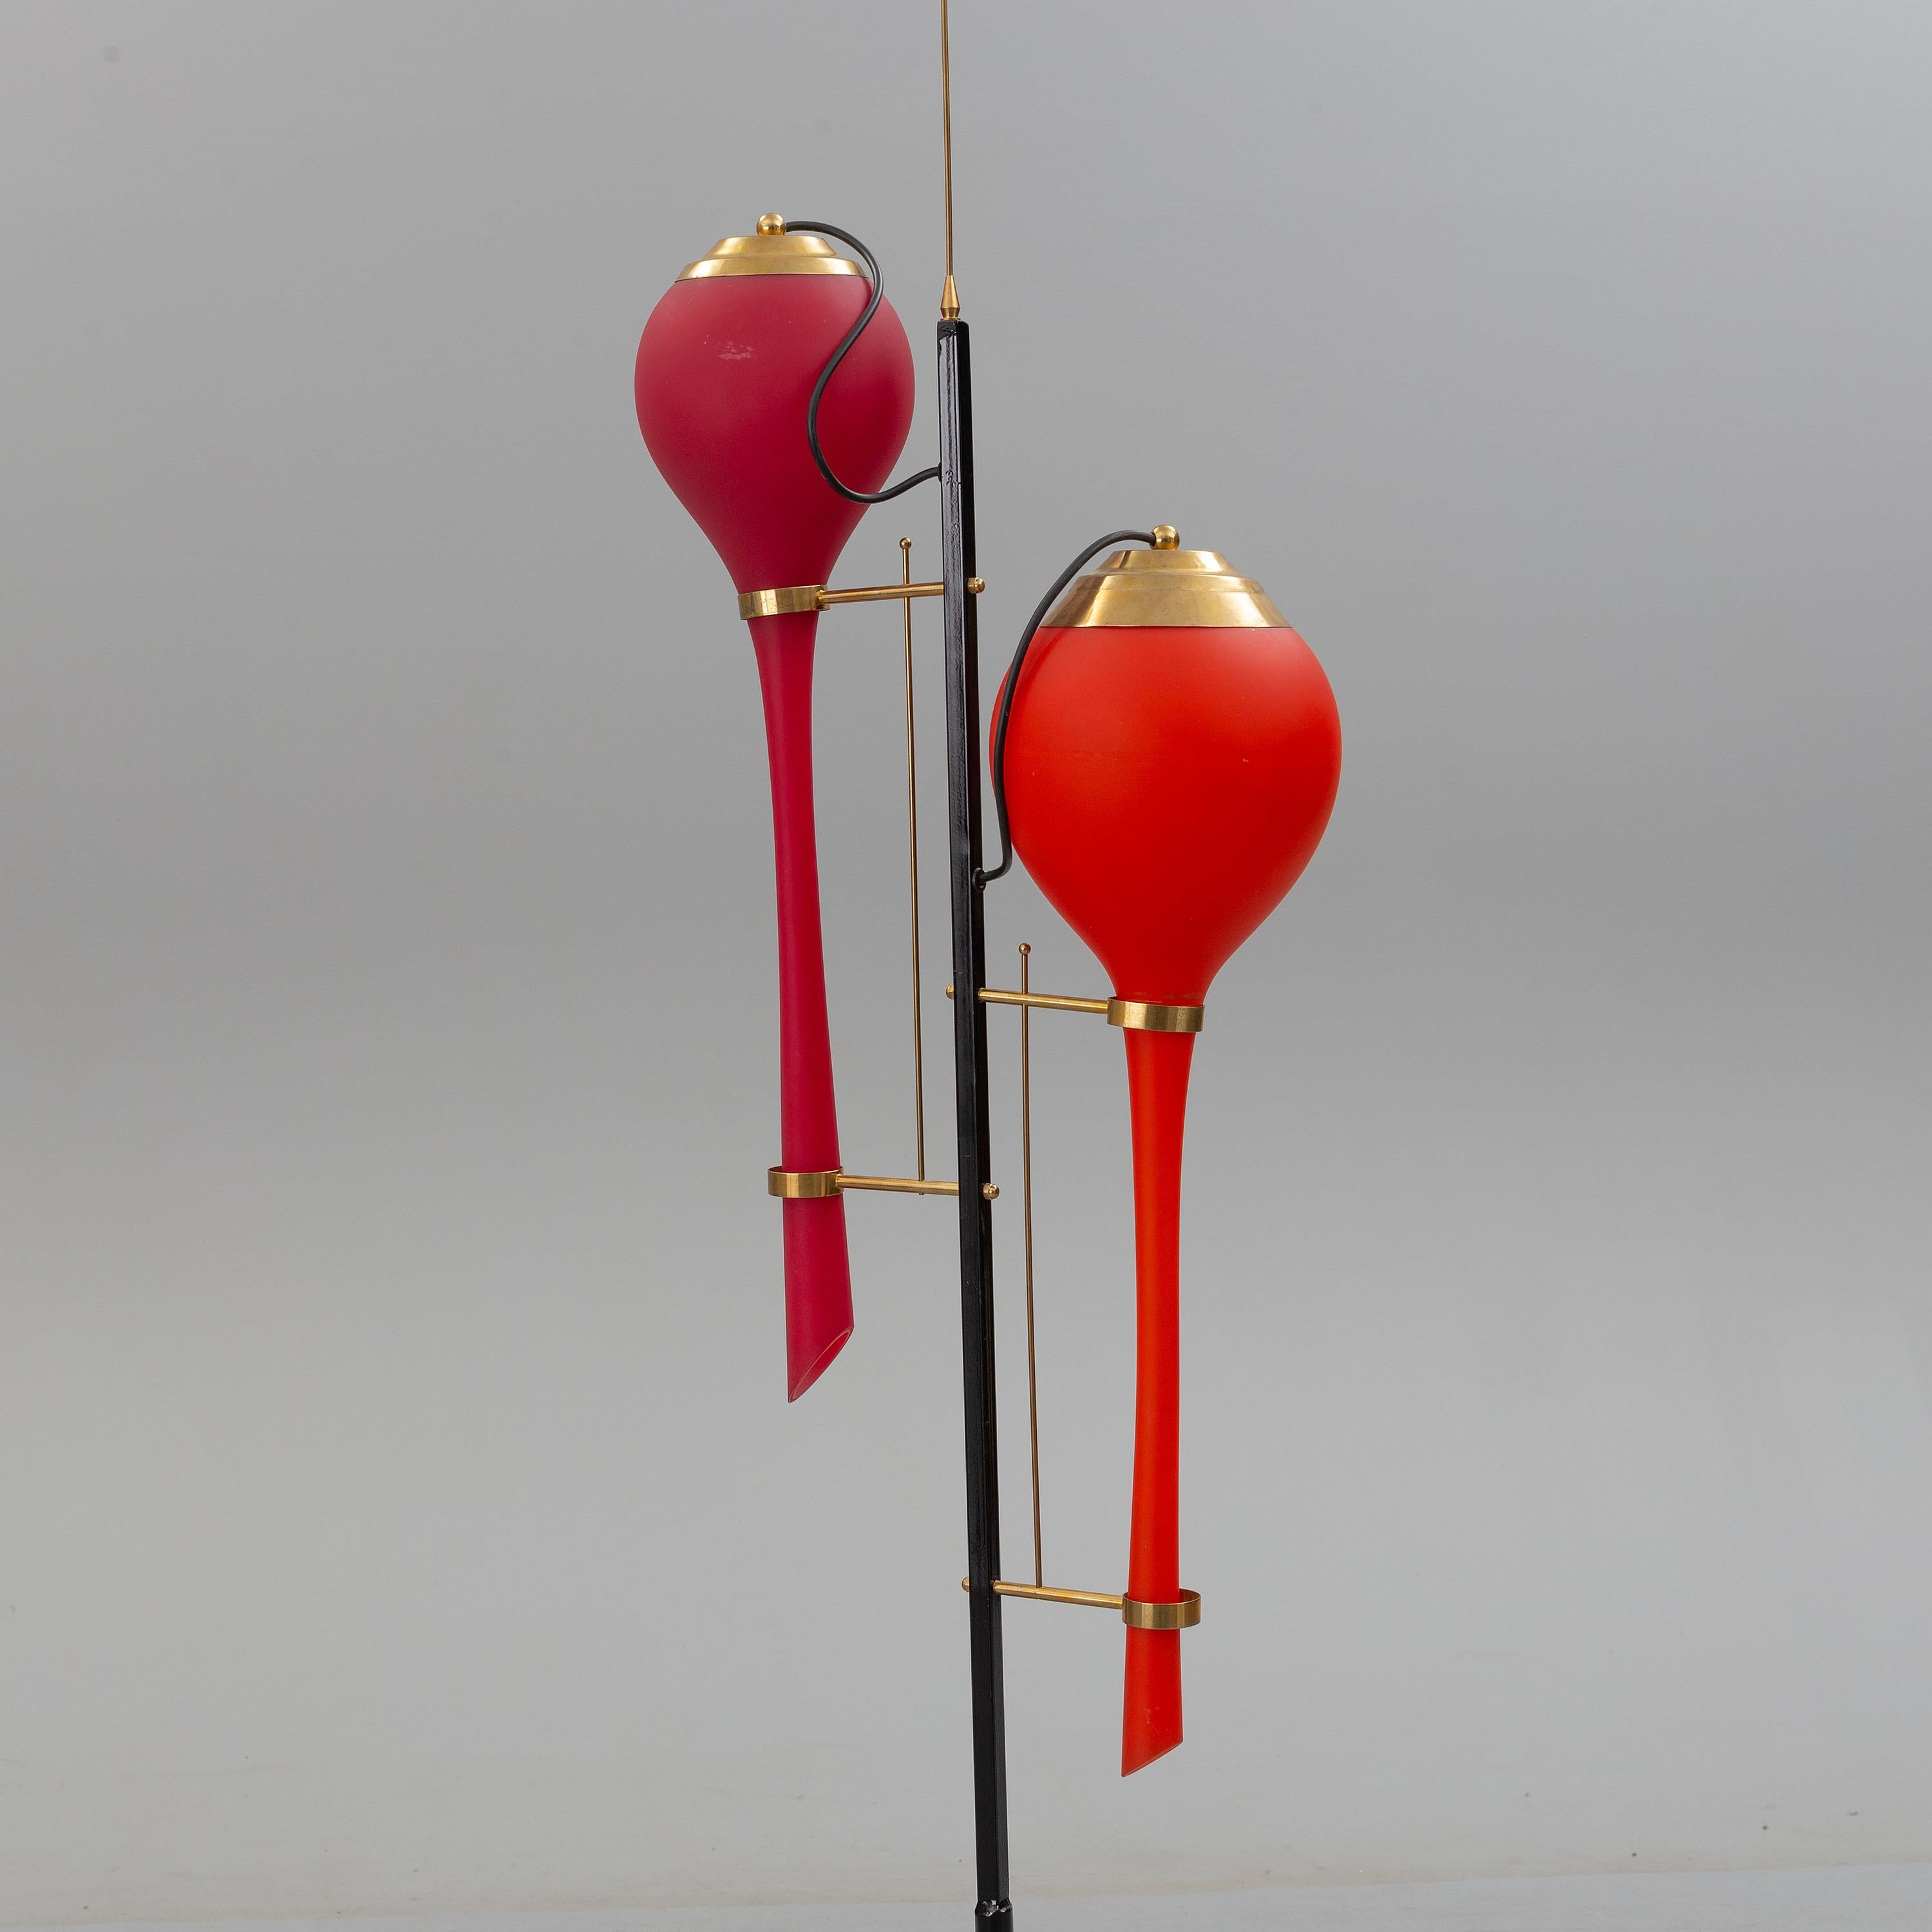 Stilnovo floor lamp from the 1950s in murano glass and brass details.